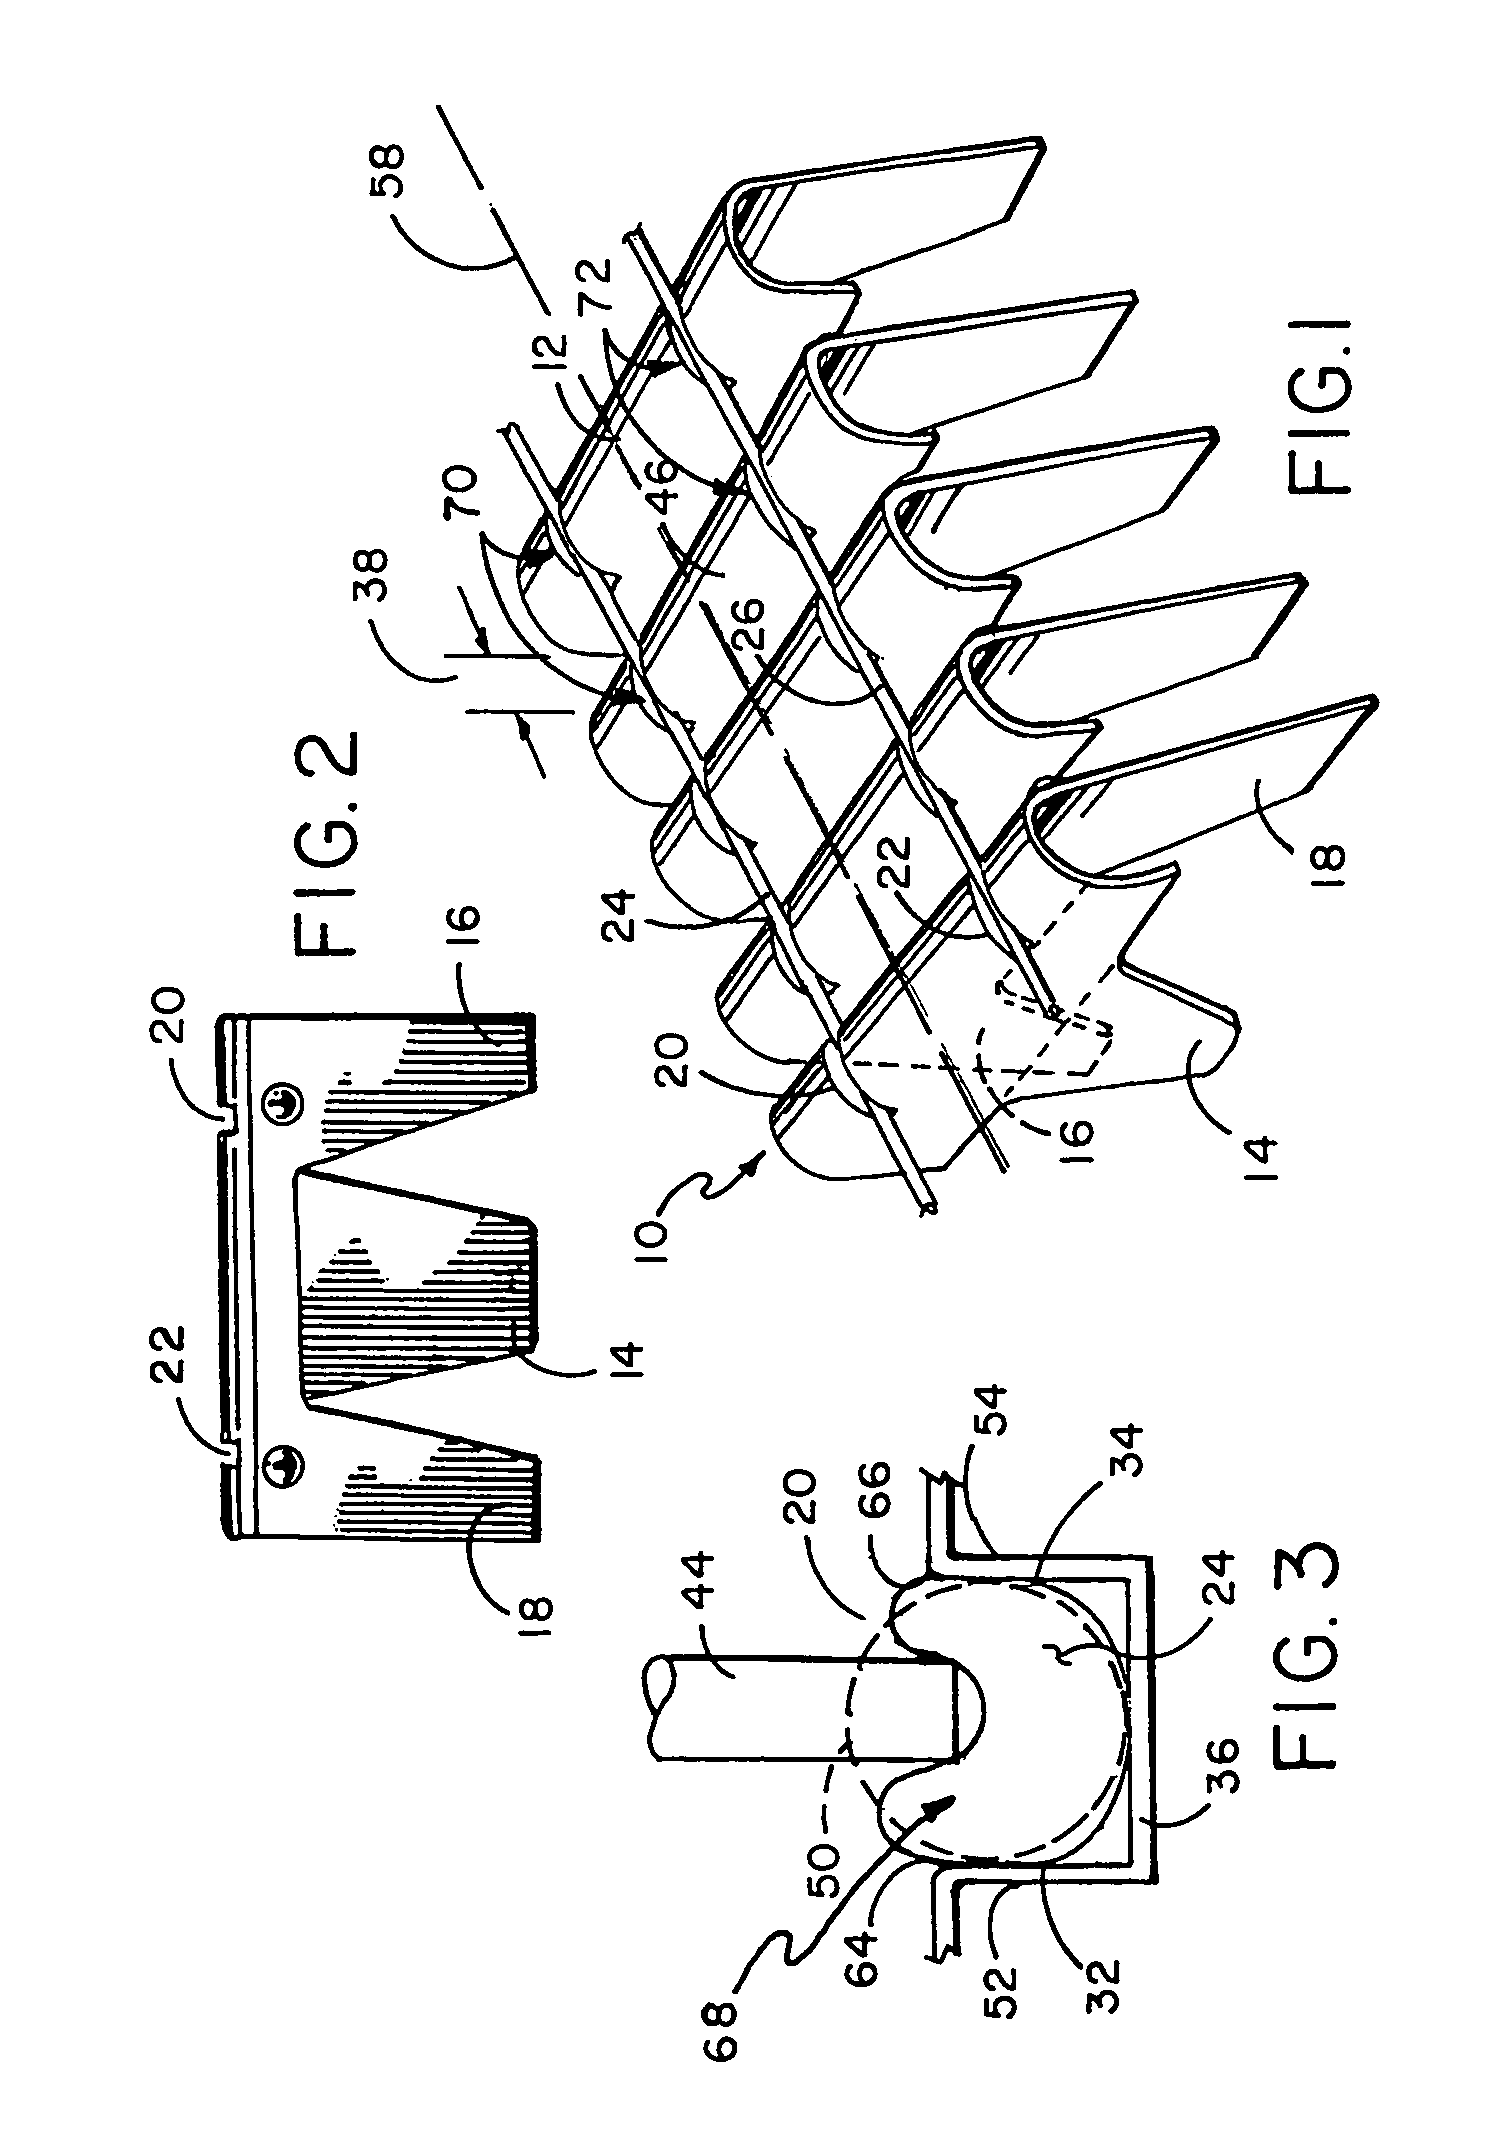 U-clip assembly and method